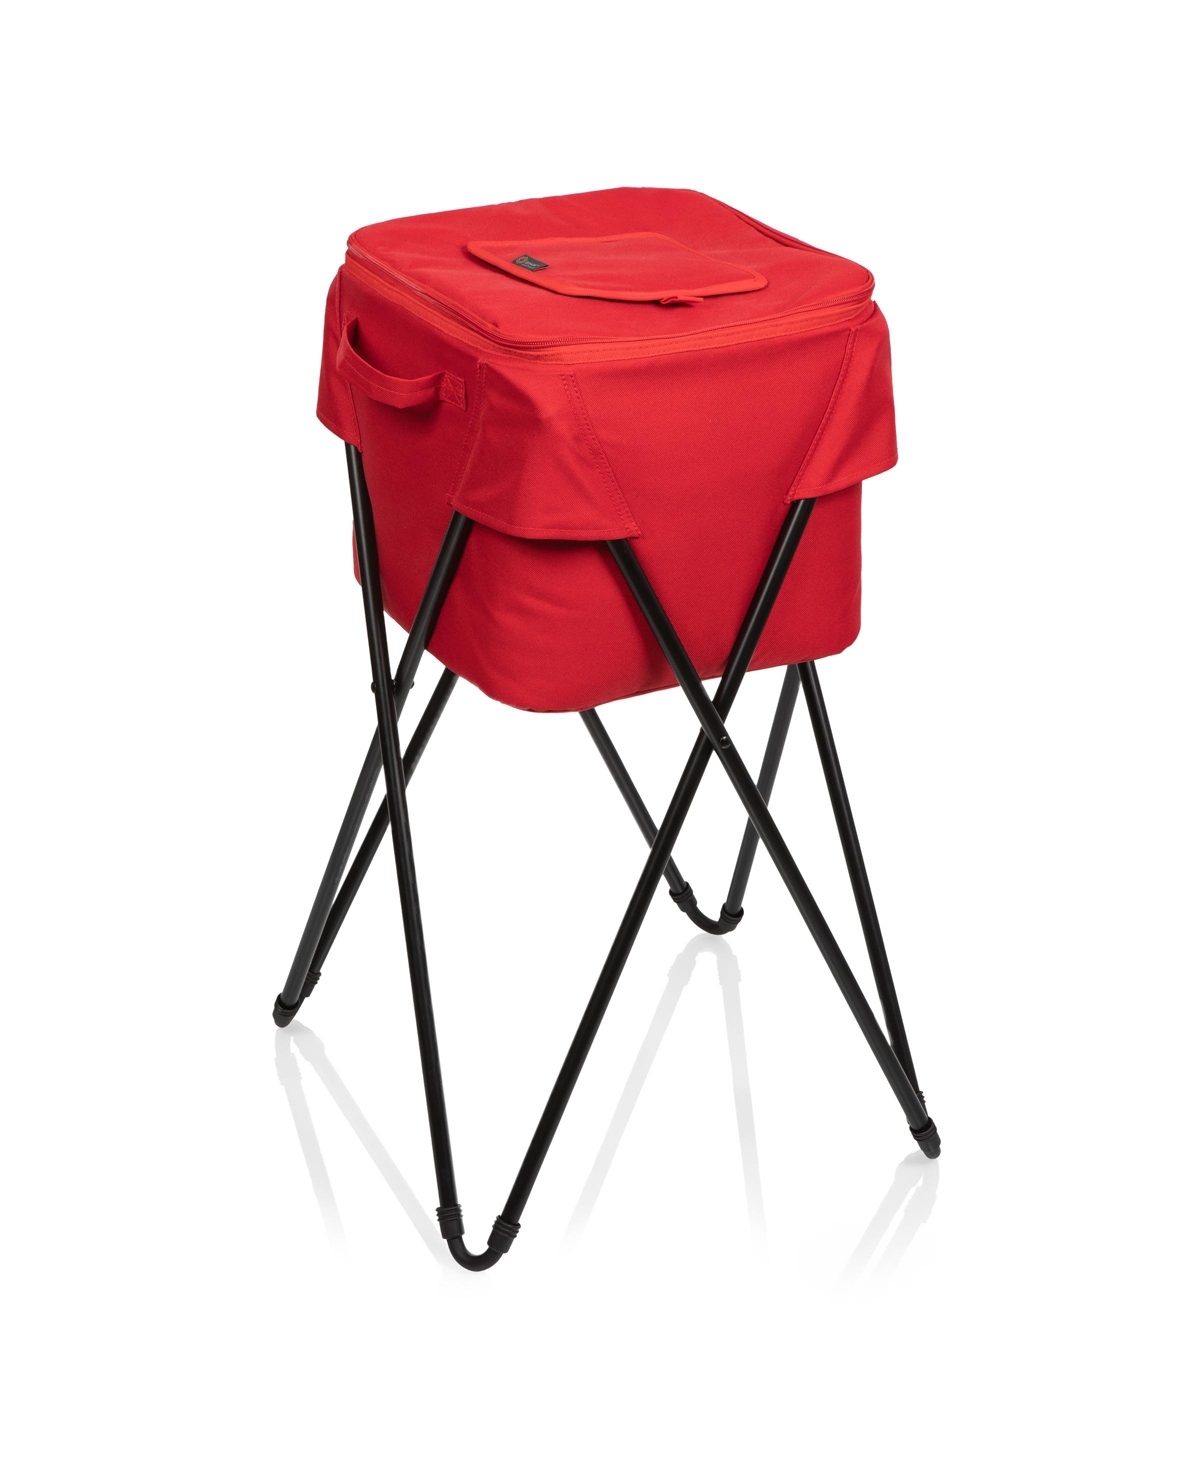 by Picnic Time Camping Party Cooler with Stand - Red